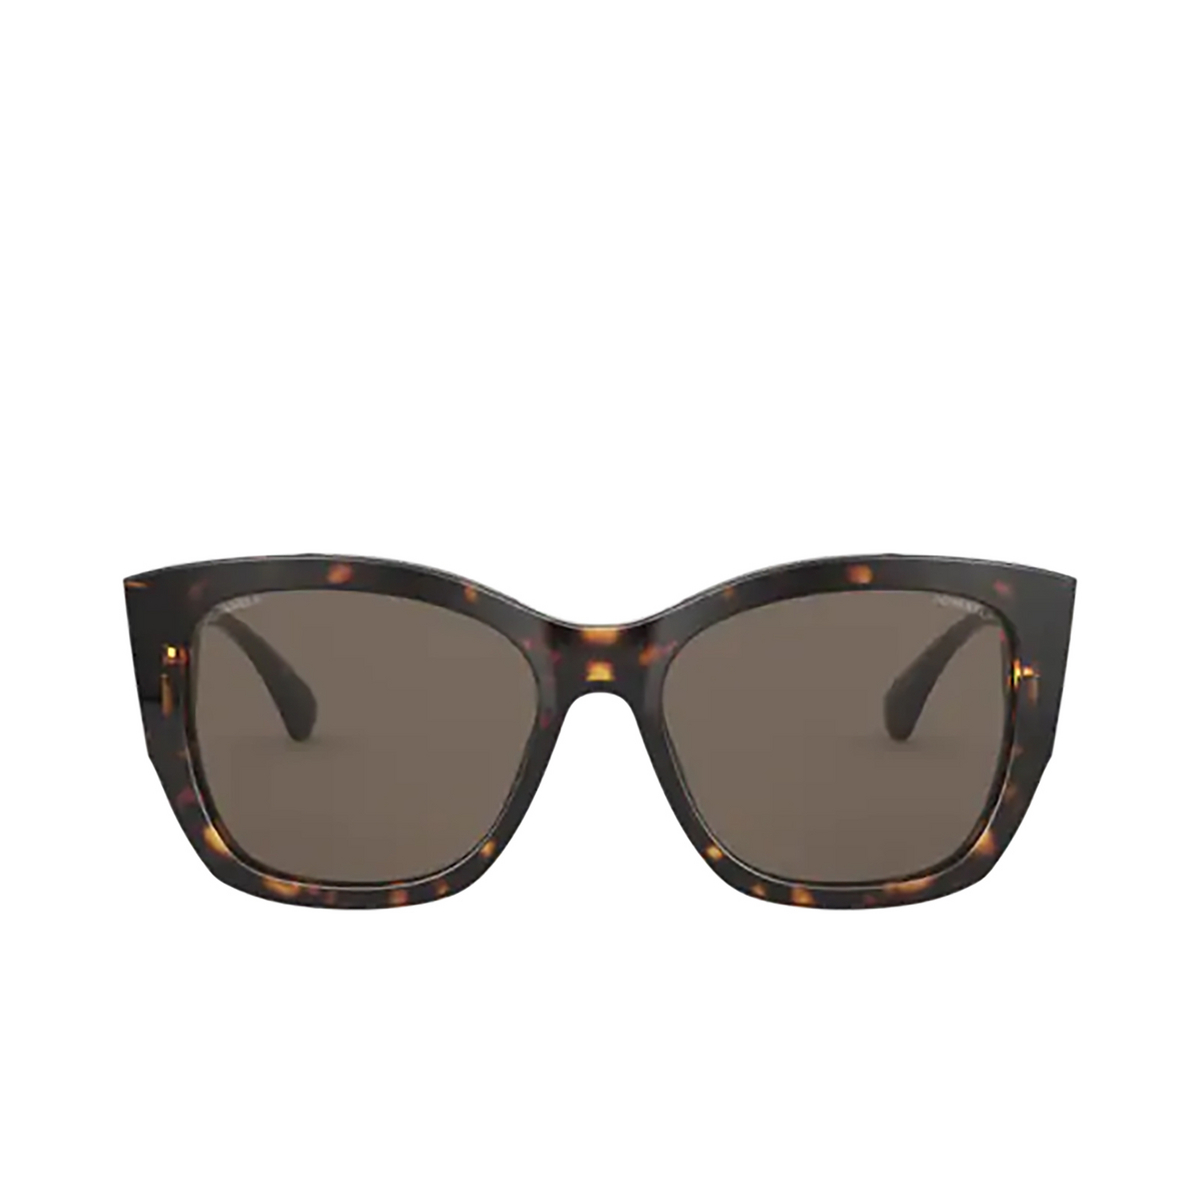 CHANEL butterfly Sunglasses C714/3 Dark Tortoise - front view